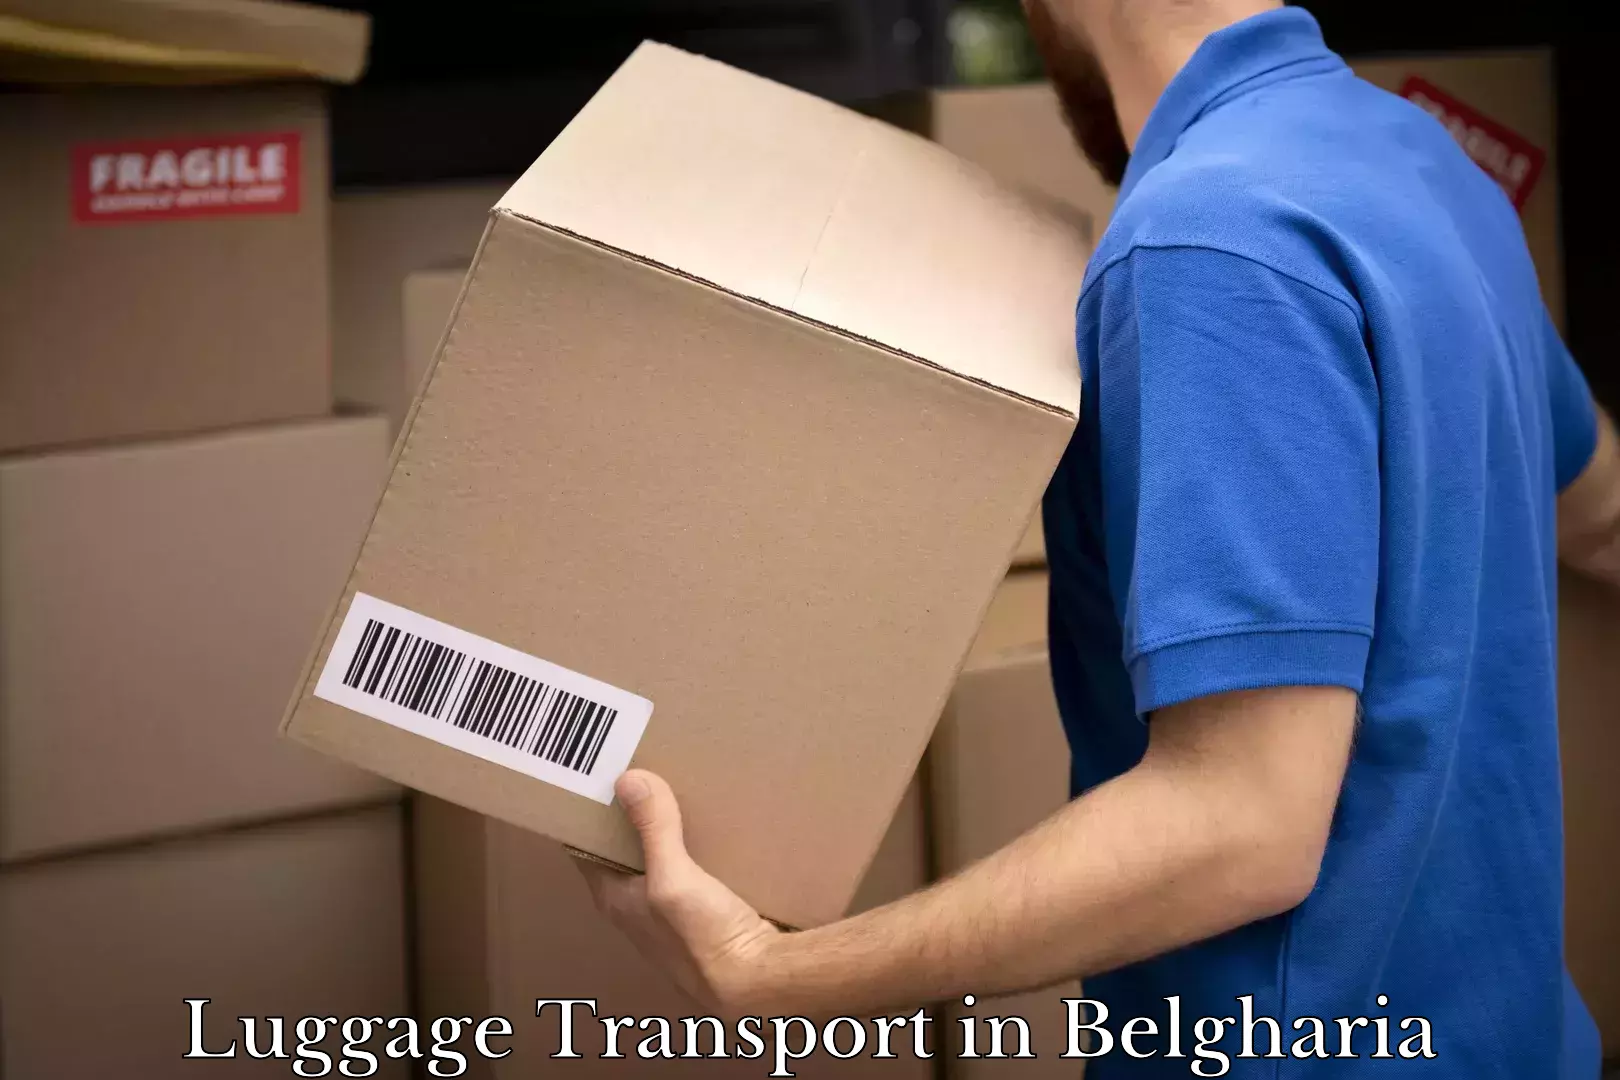 Luggage dispatch service in Belgharia